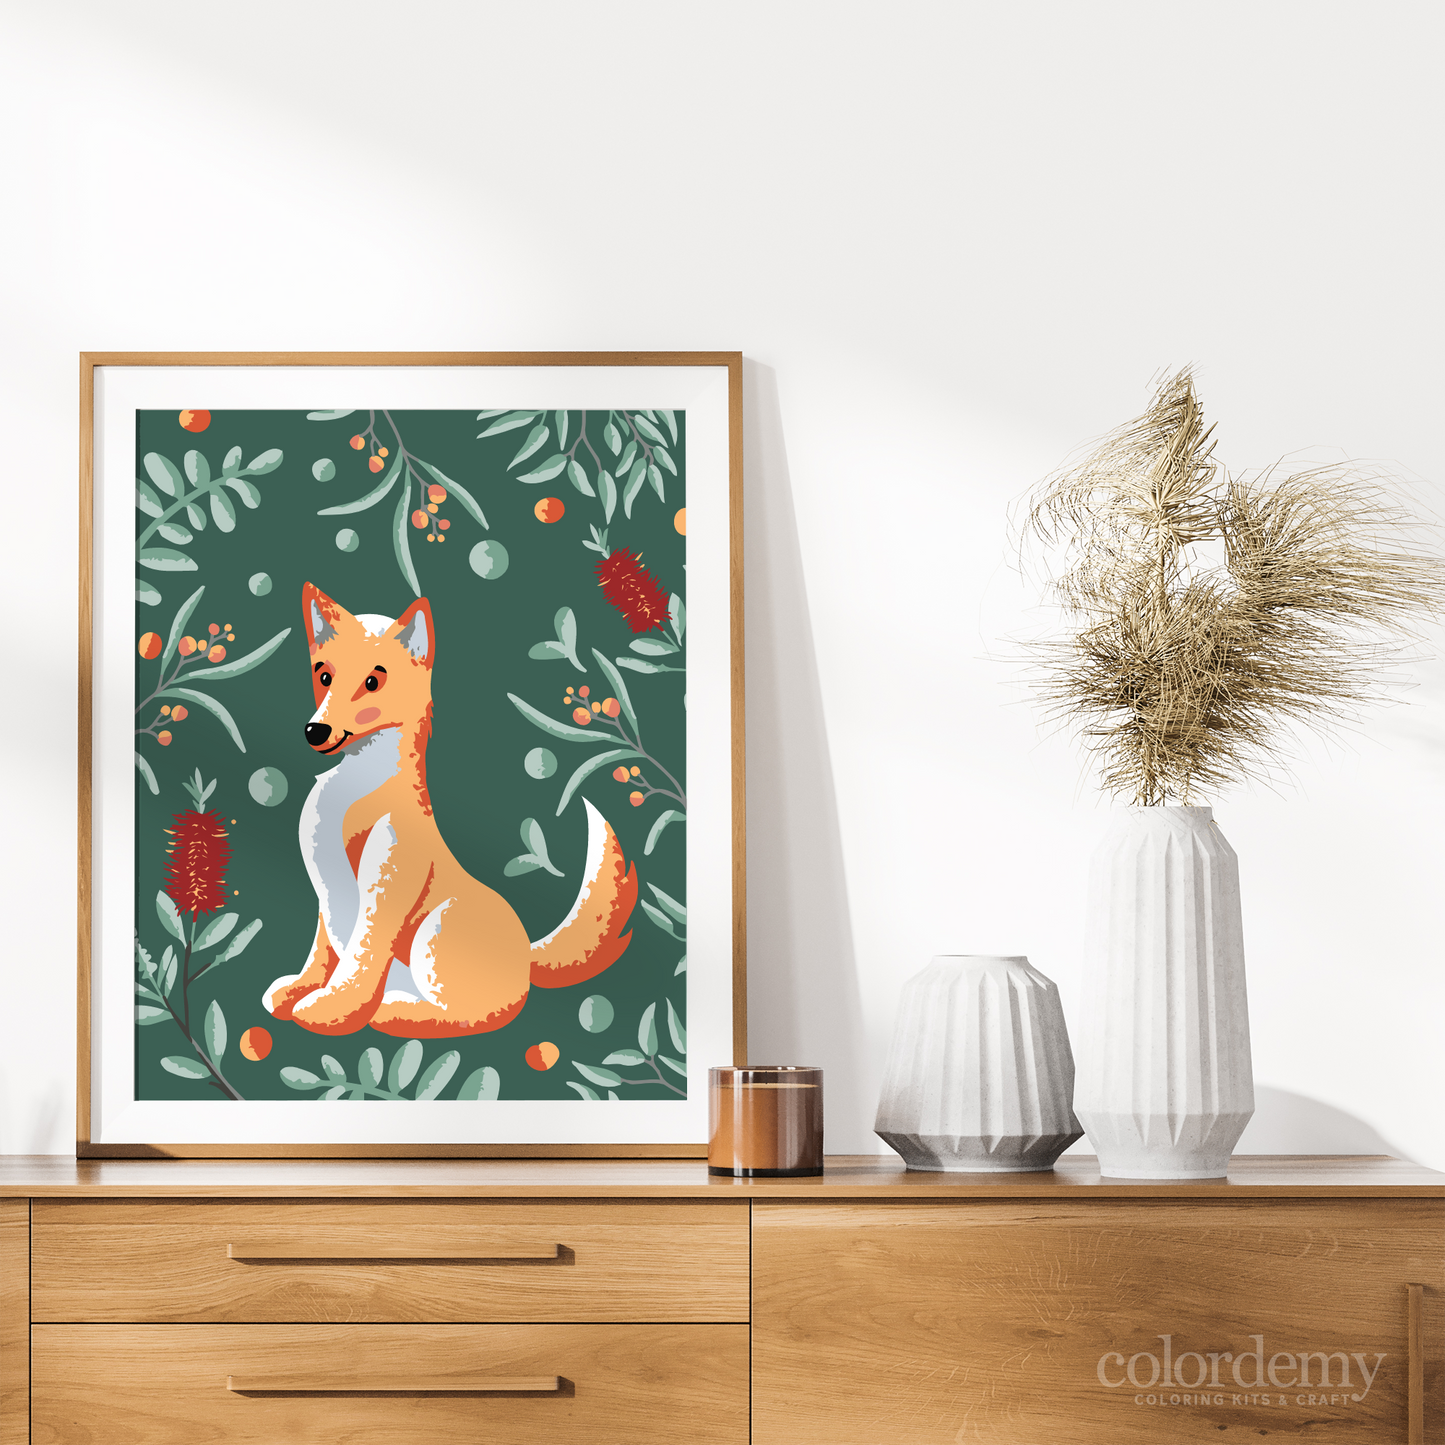 40x50cm Paint by Numbers kit: Leafy Outback: Simple Dingo